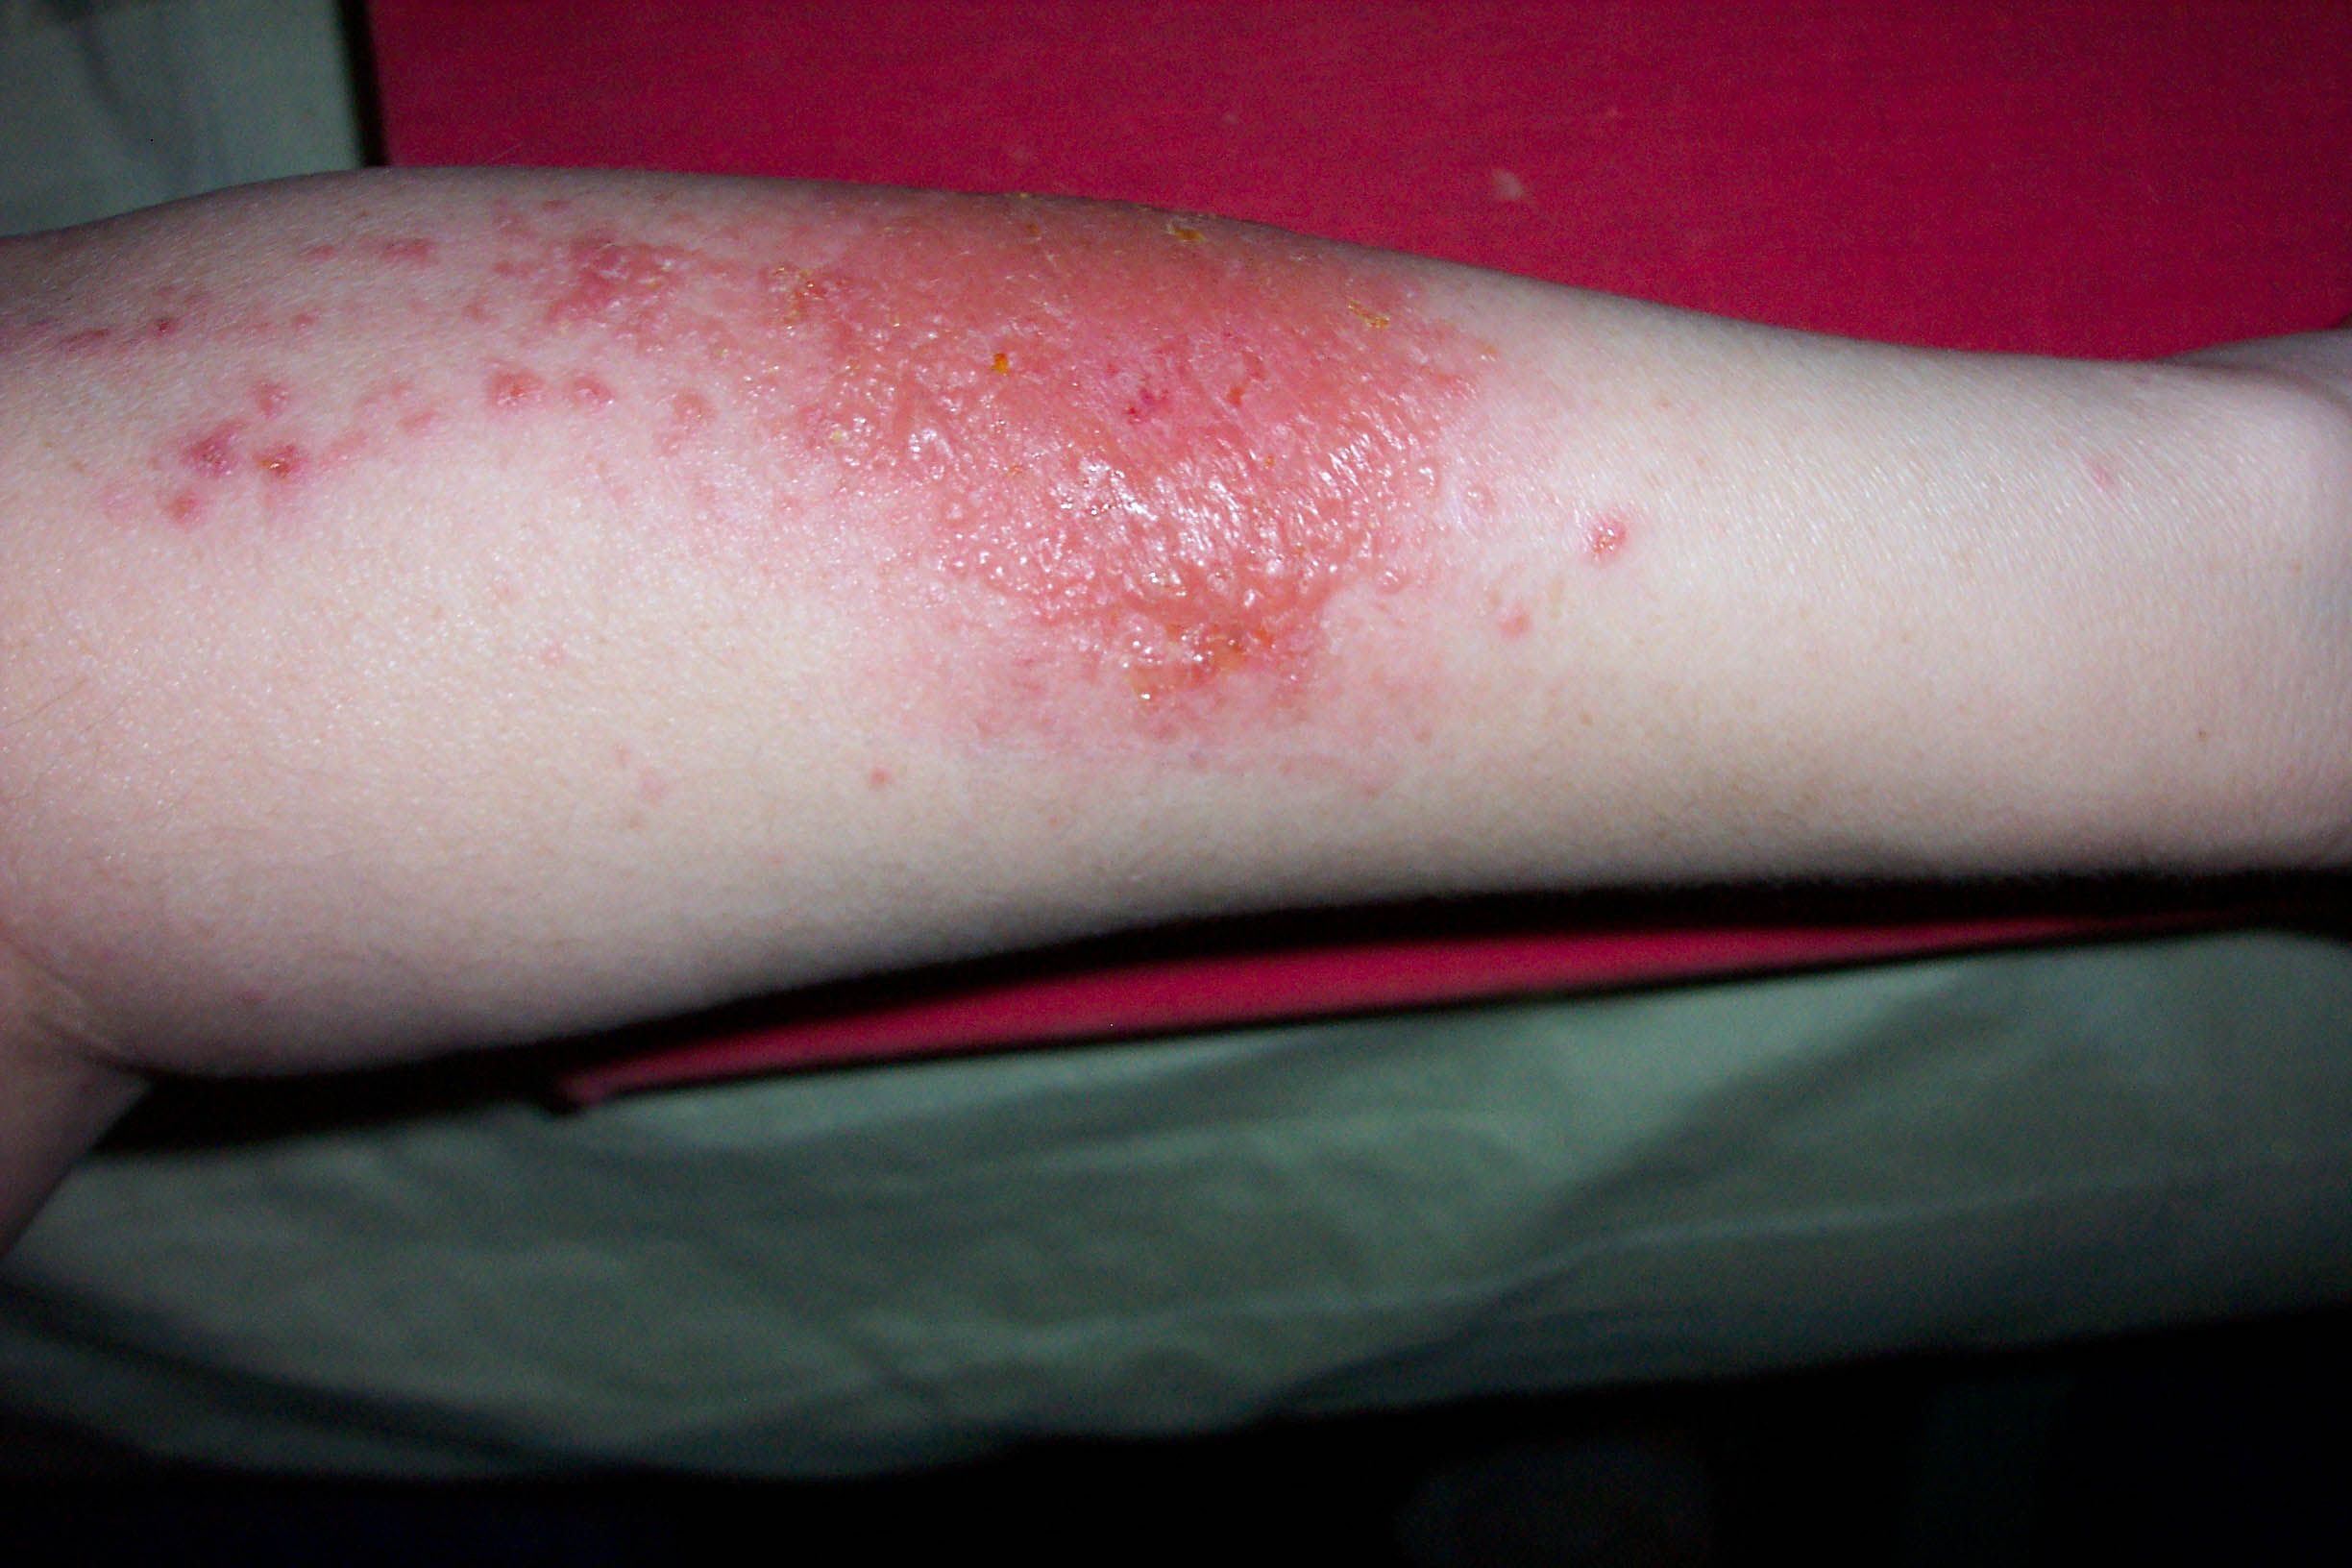 Skin Lesions: Pictures, Causes, Diagnosis, Treatment & More